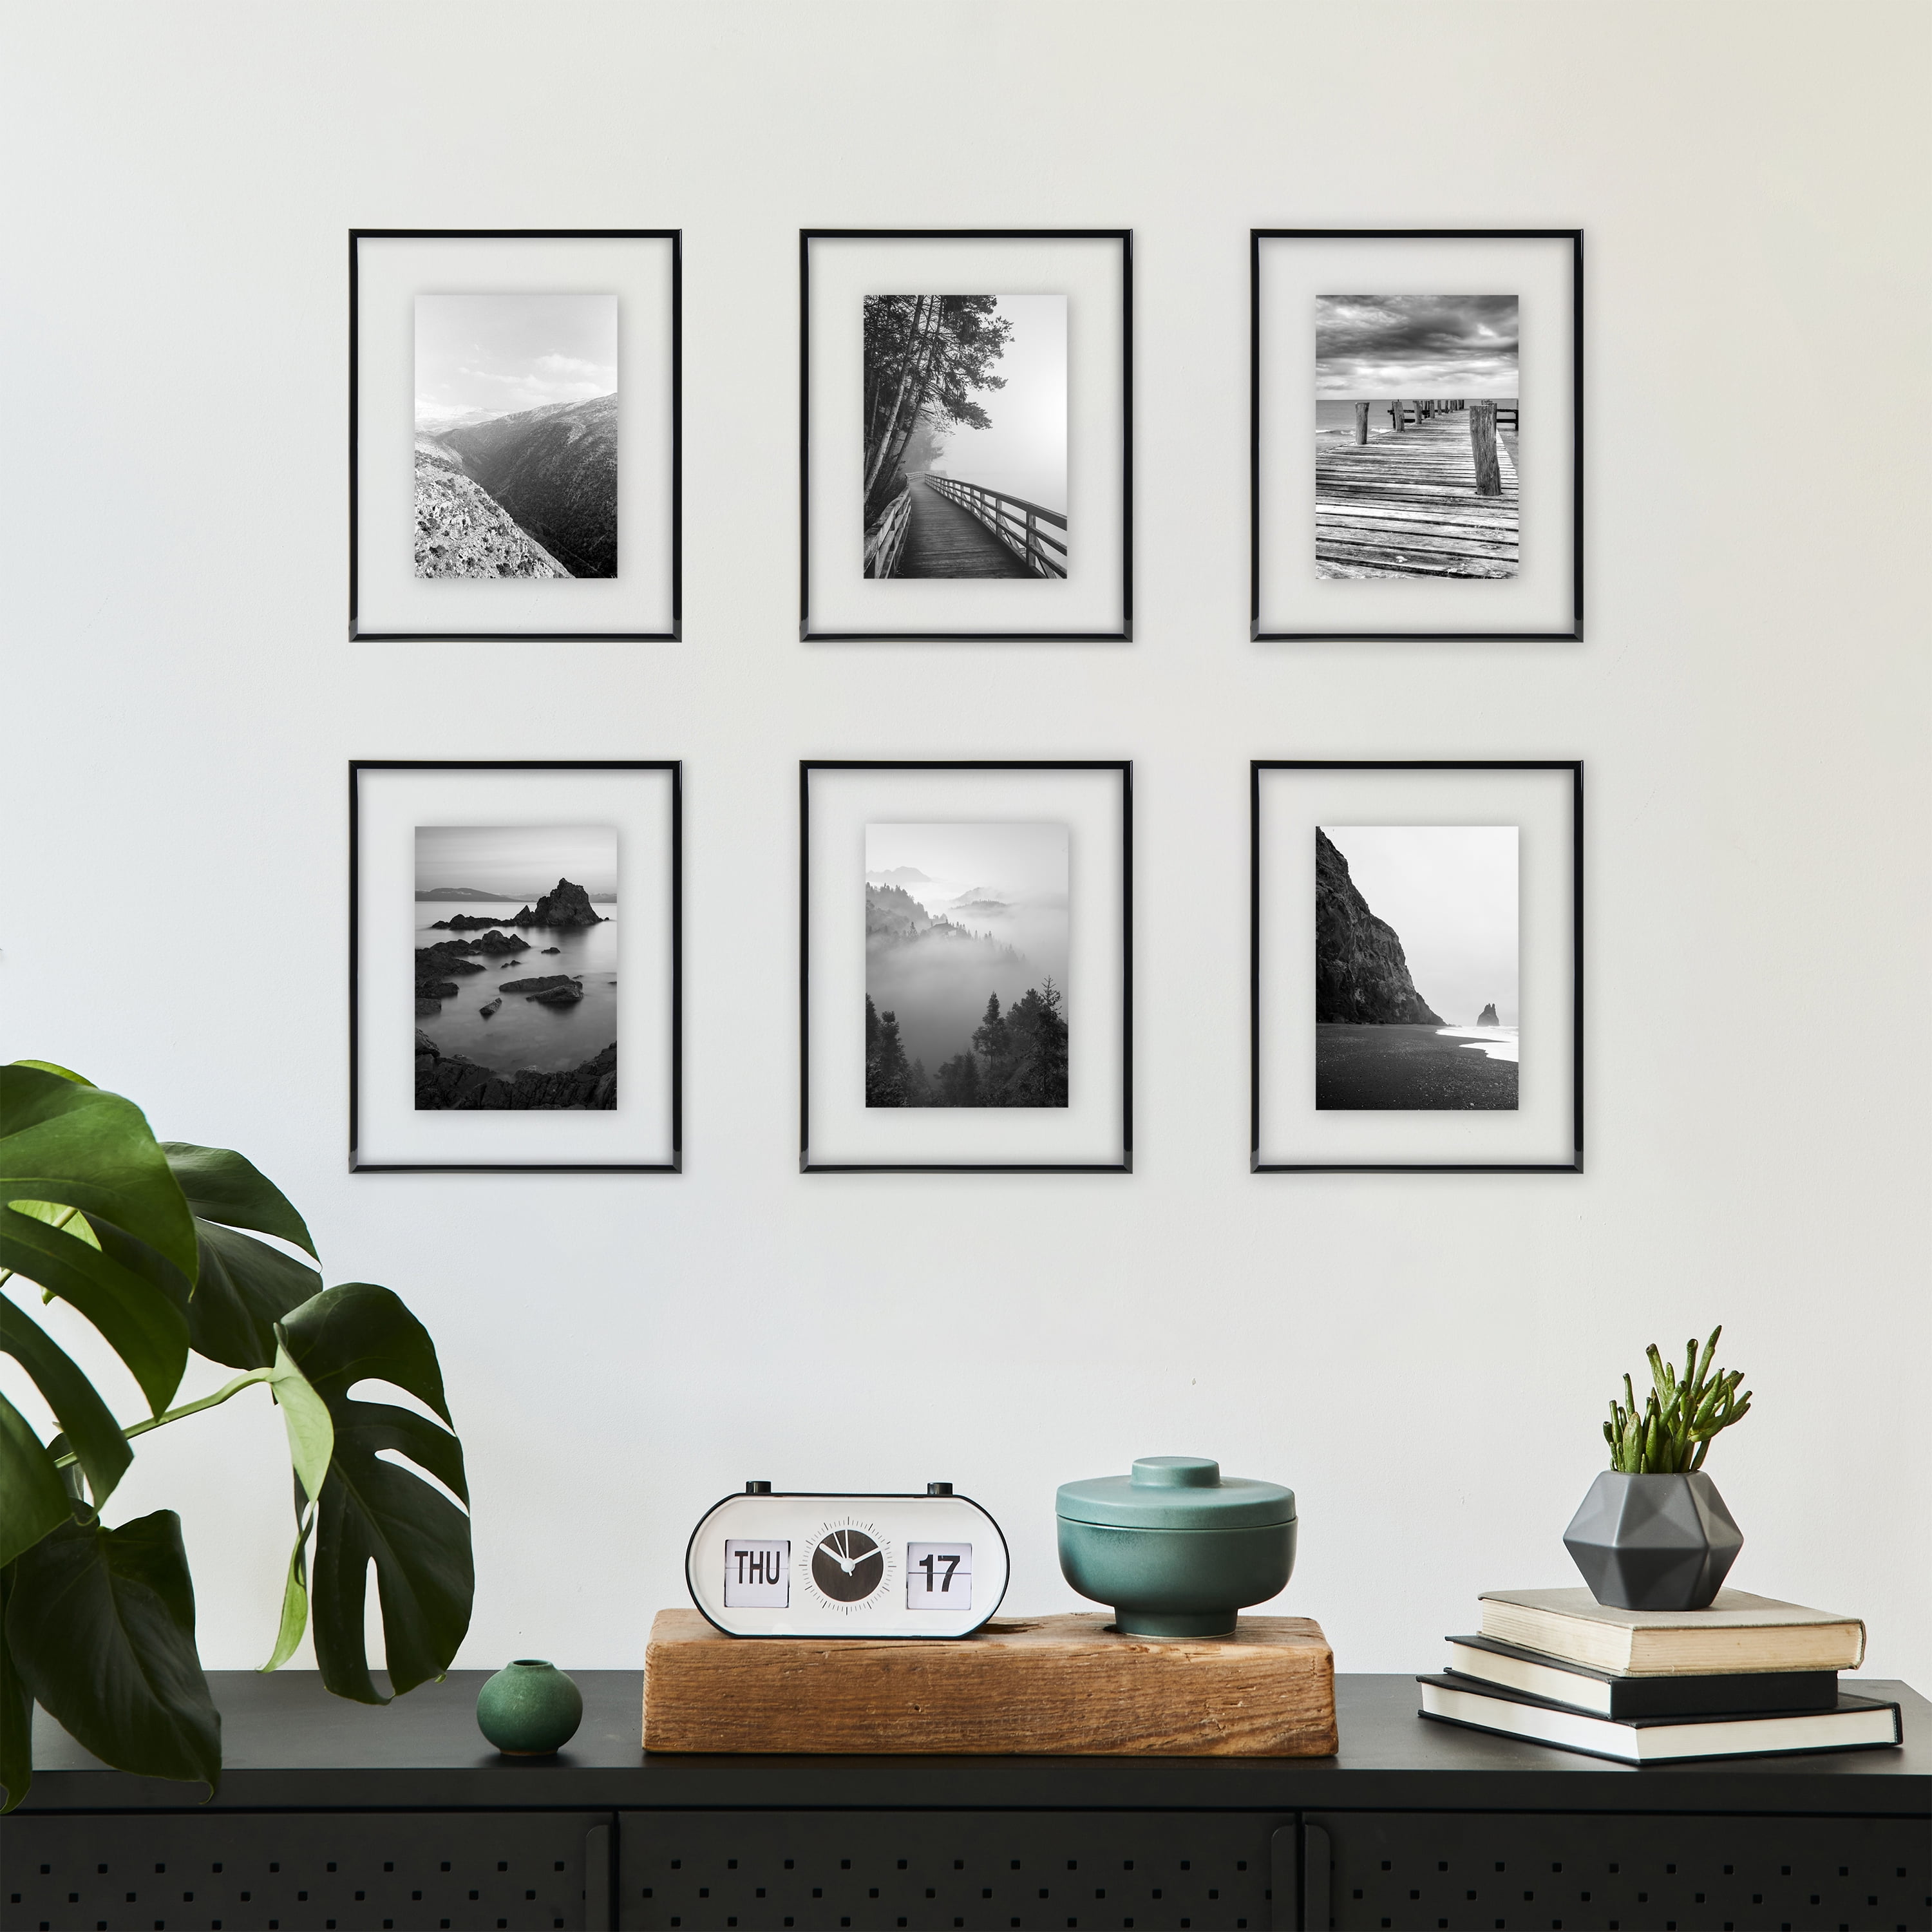 8x10 Floating Frames for Home or Office Decor 